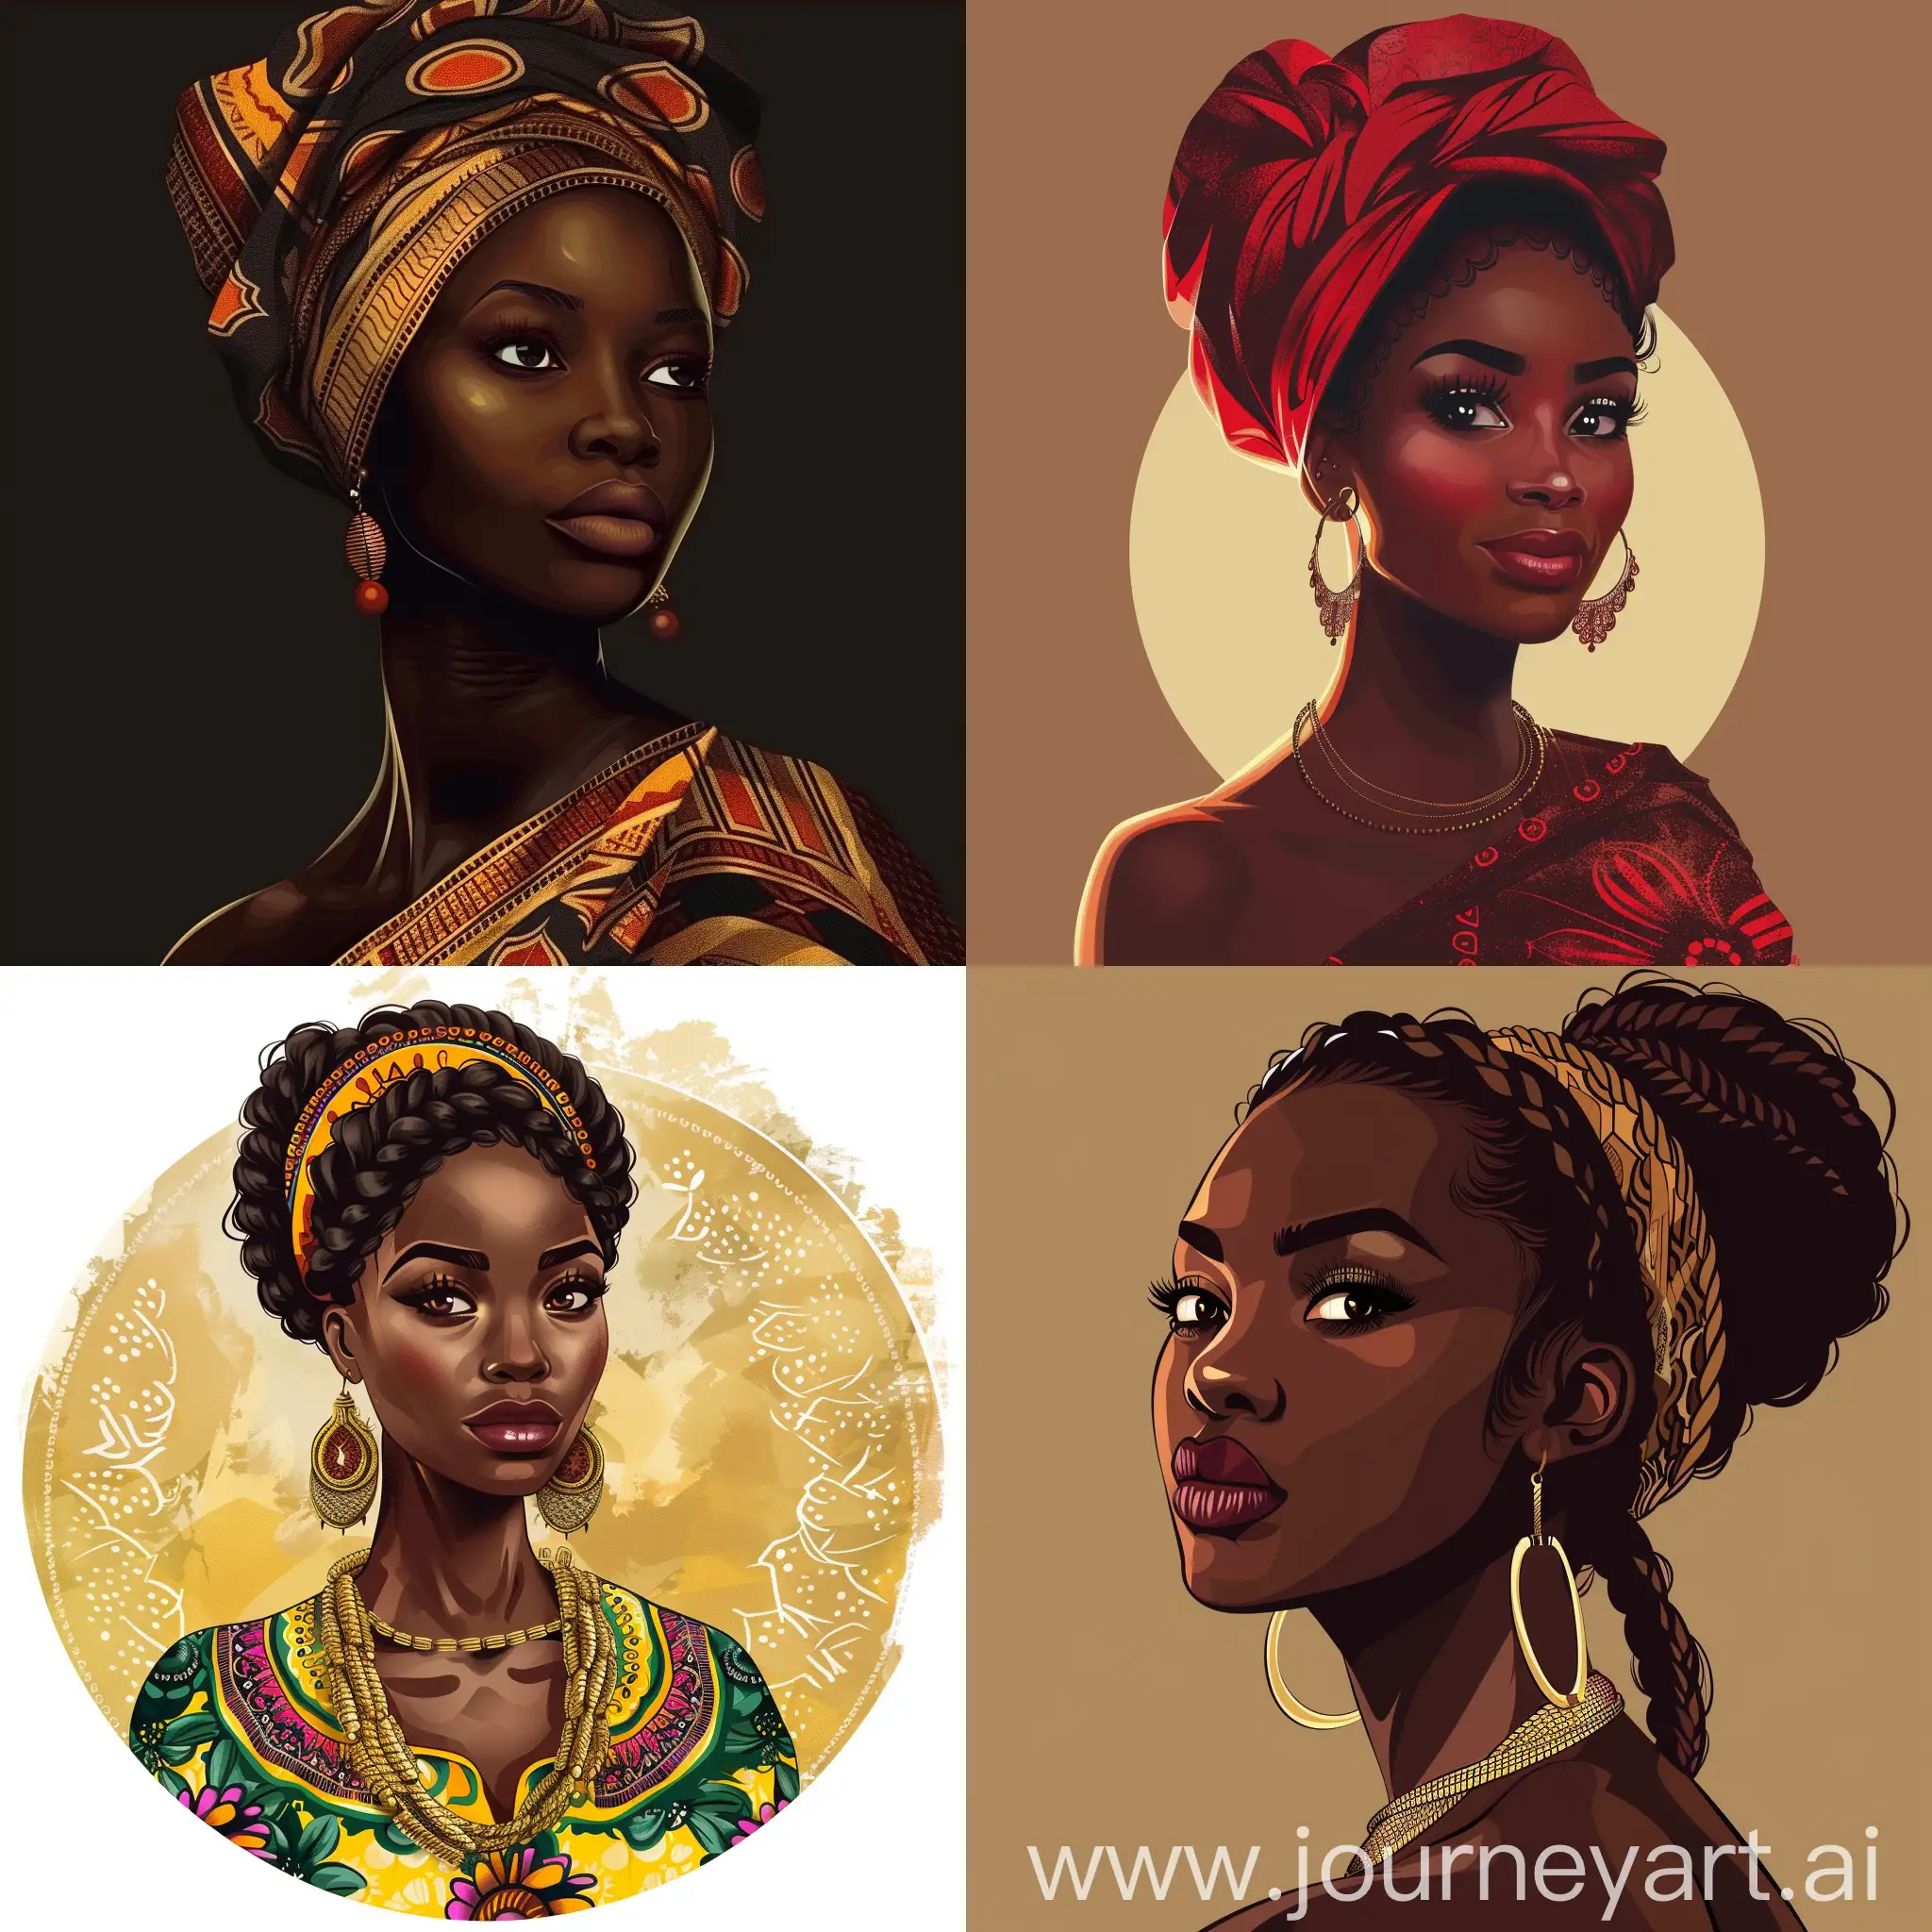 A beautiful African woman, illustration